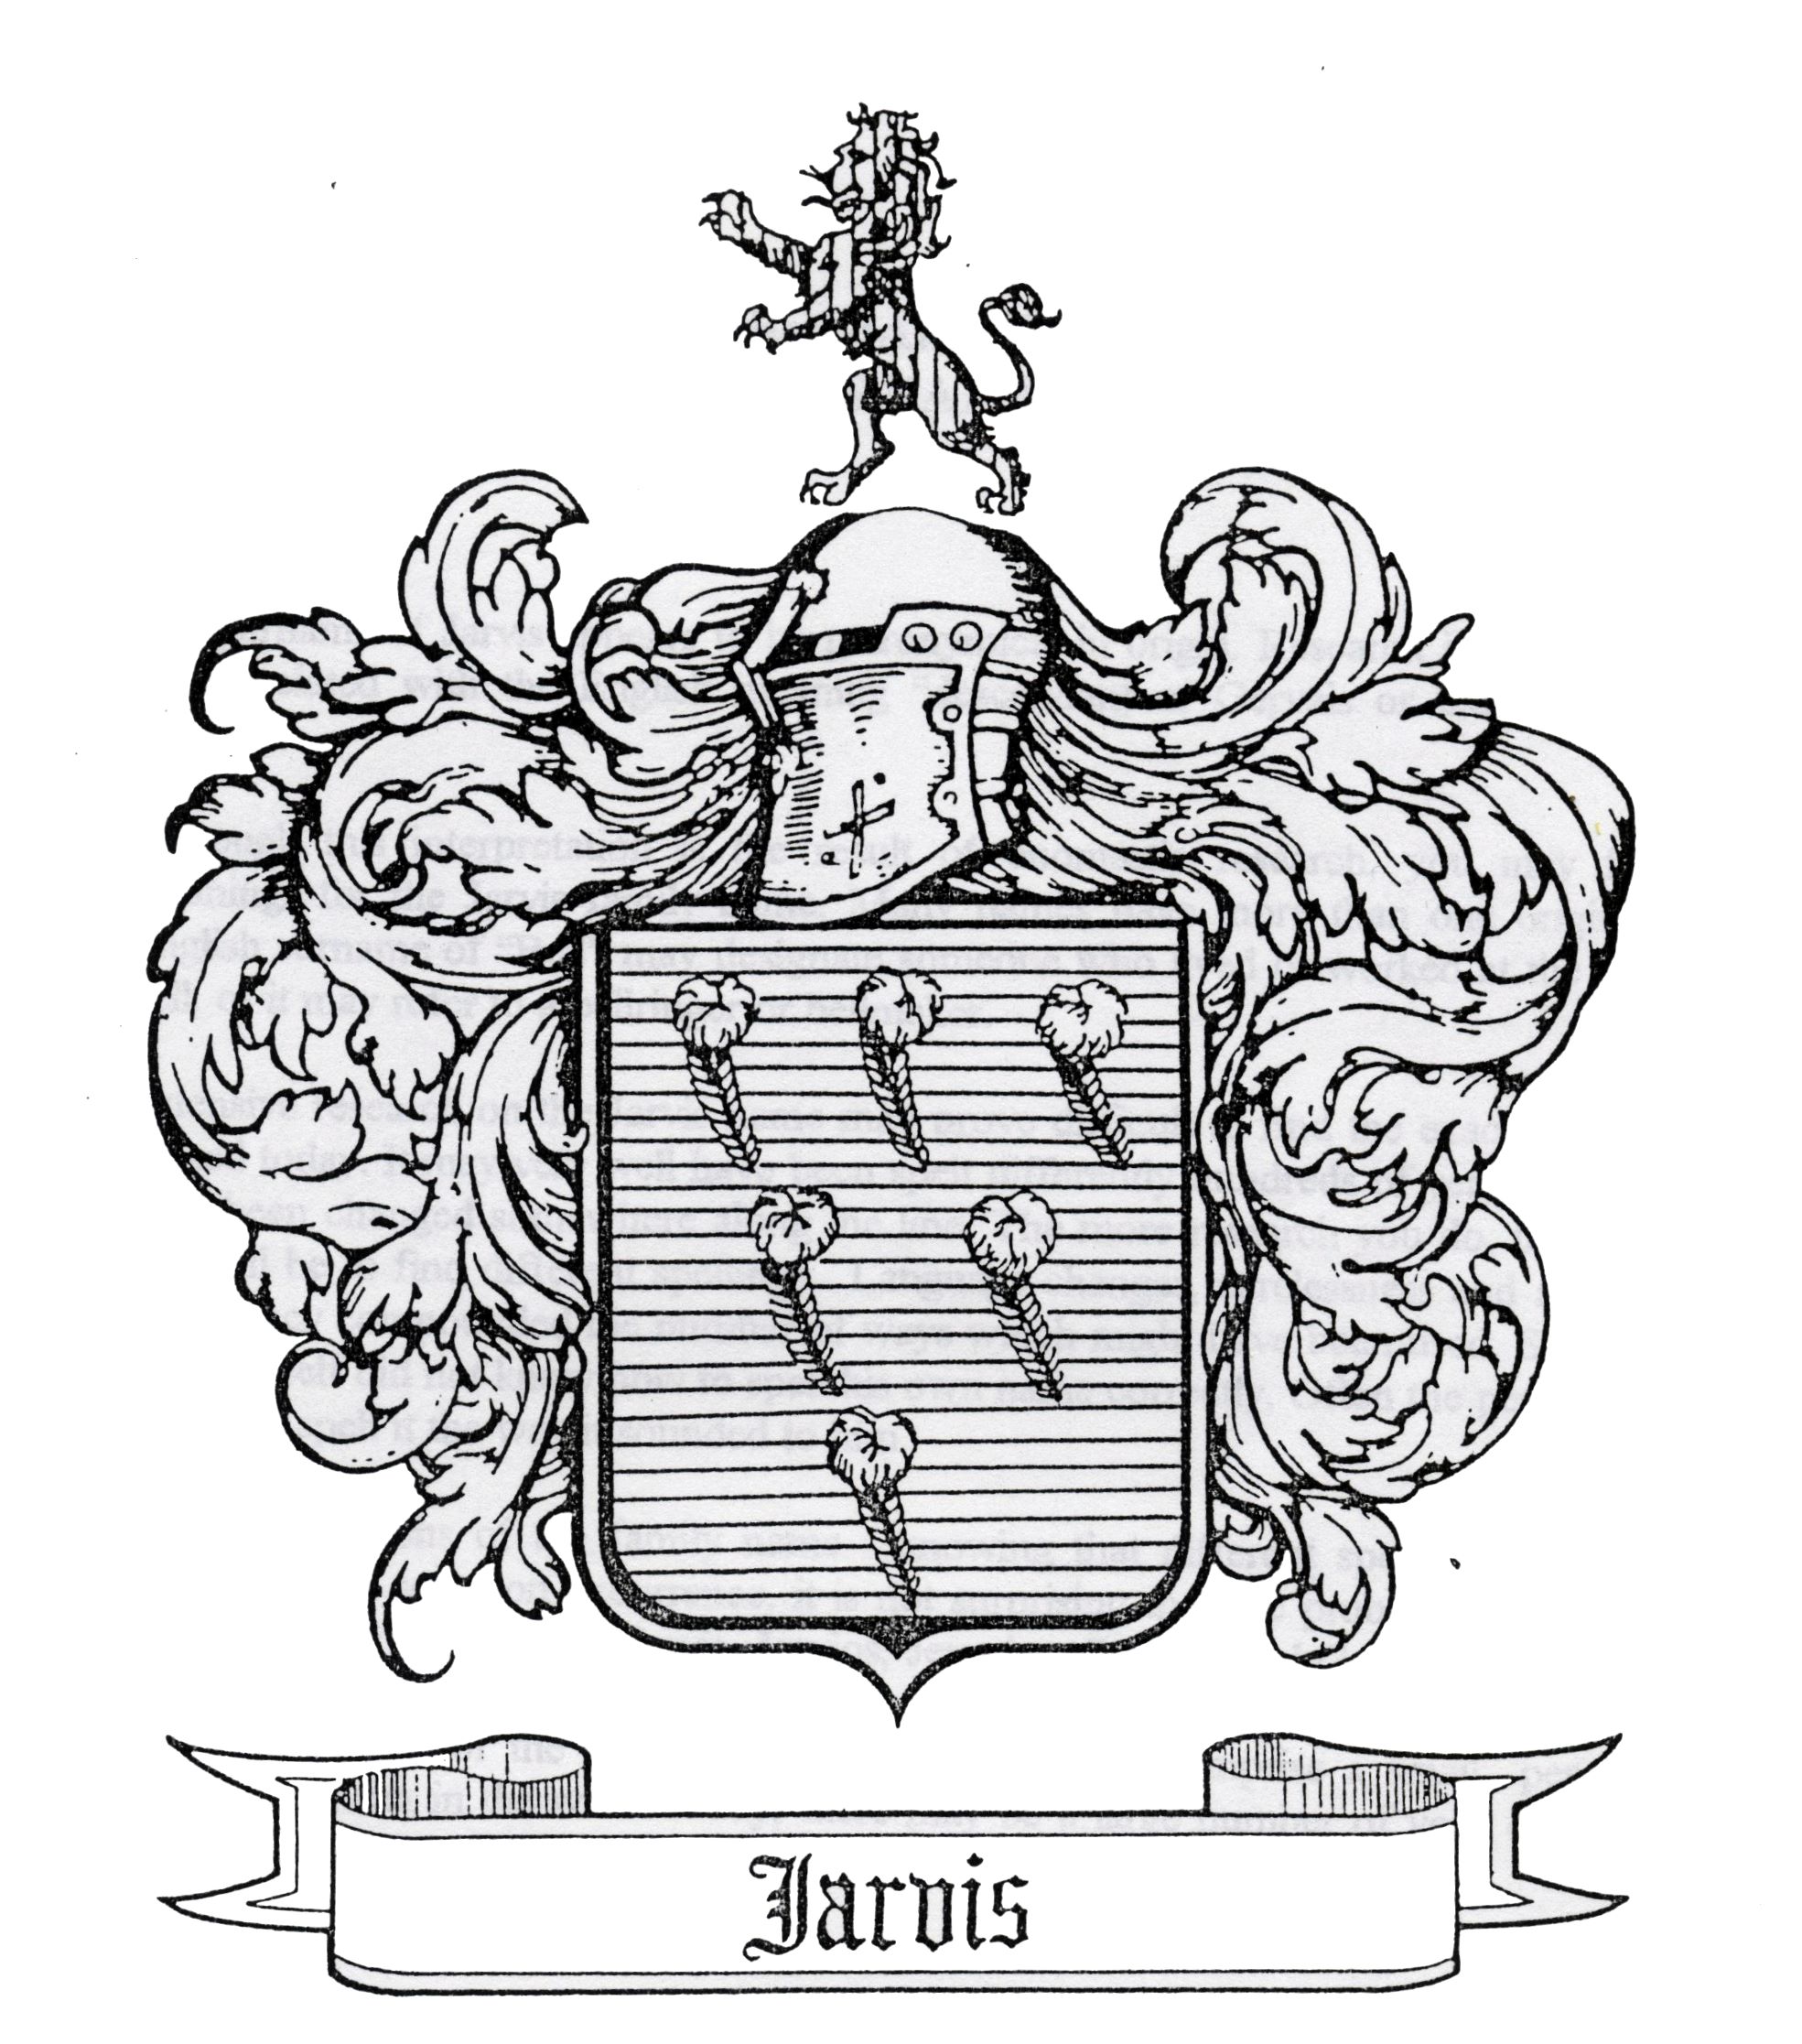 Jarvis family coat of arms